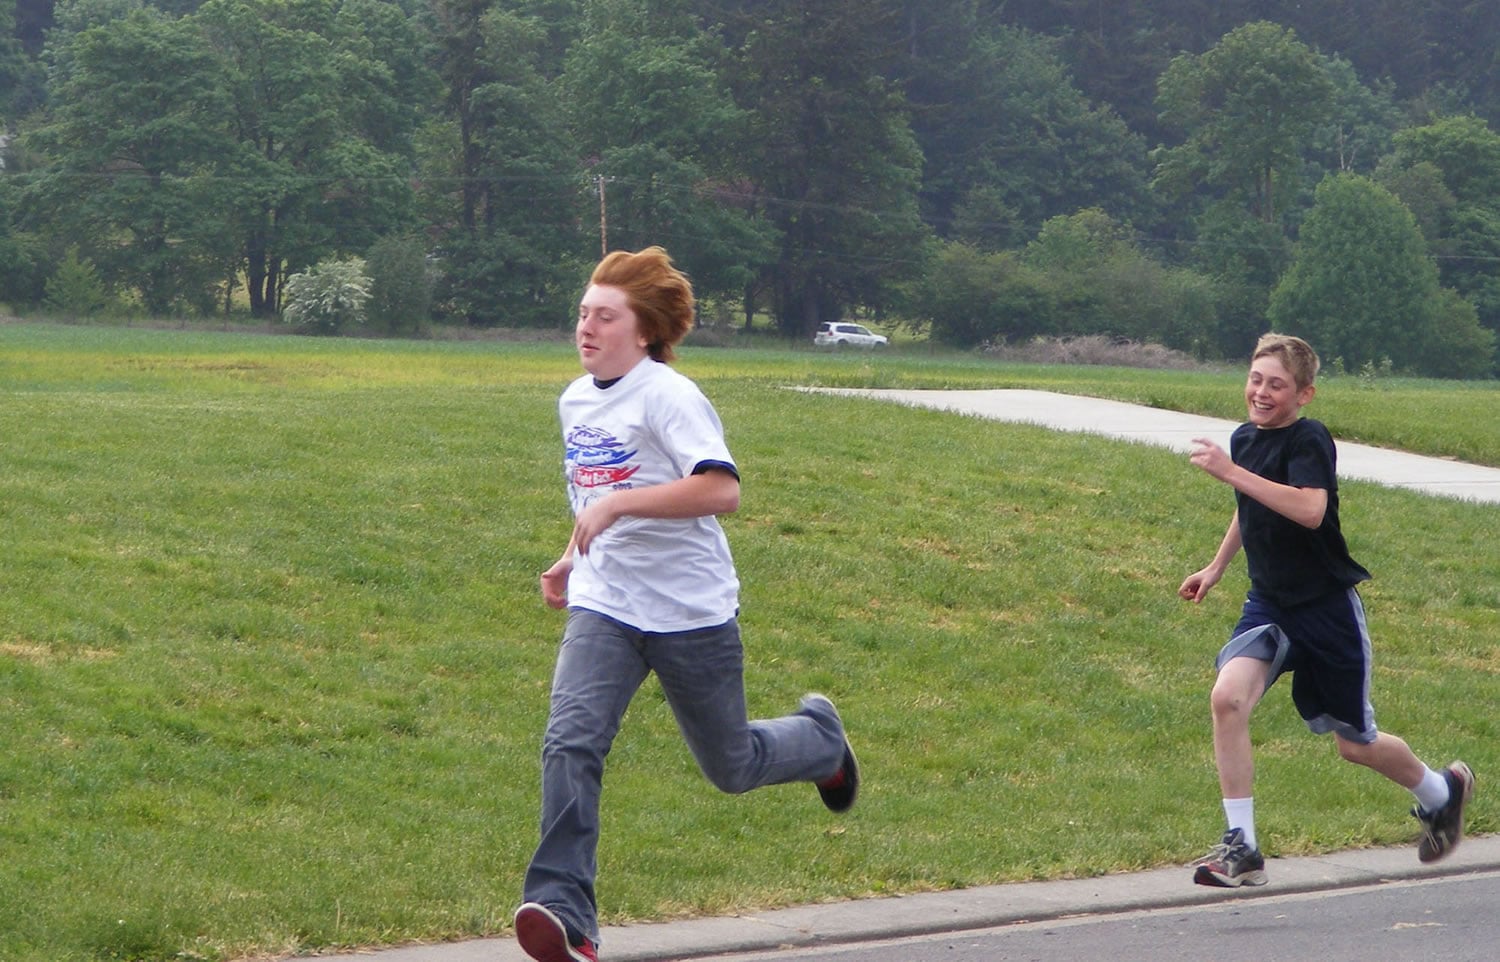 Battle Ground: Justin Fletcher is in the lead with Kyle Peterson on his tail at the Relay for Life walk/run at Tukes Valley Middle School.